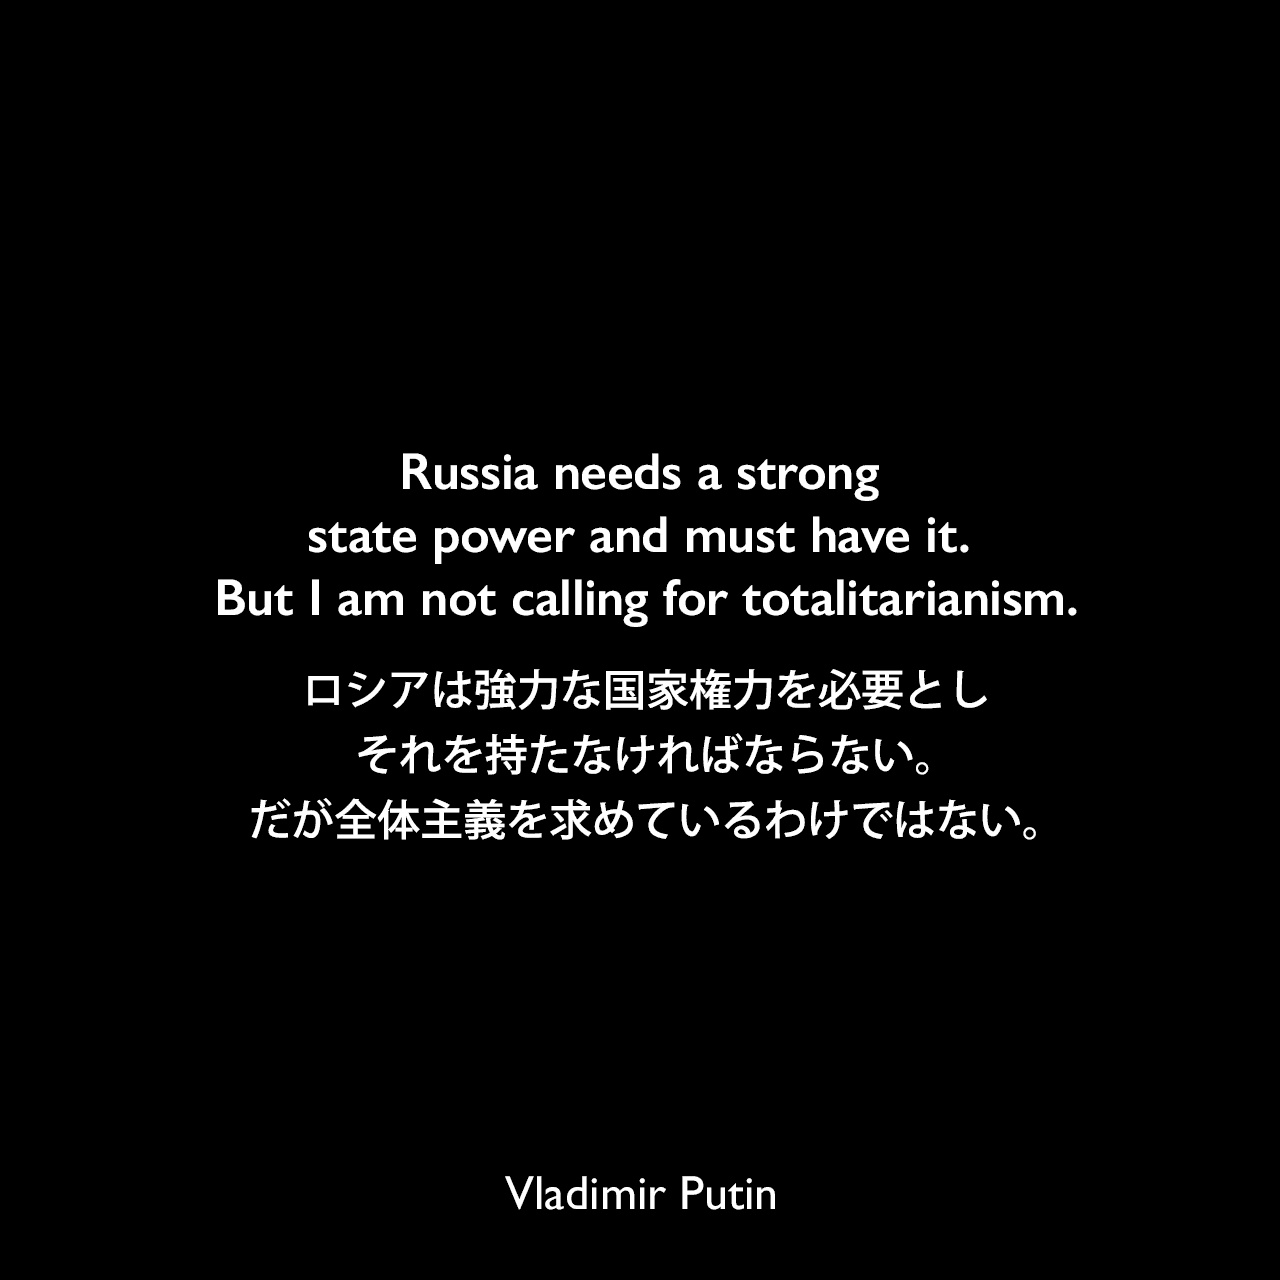 Russia needs a strong state power and must have it. But I am not calling for totalitarianism.ロシアは強力な国家権力を必要とし、それを持たなければならない。だが全体主義を求めているわけではない。Vladimir Putin